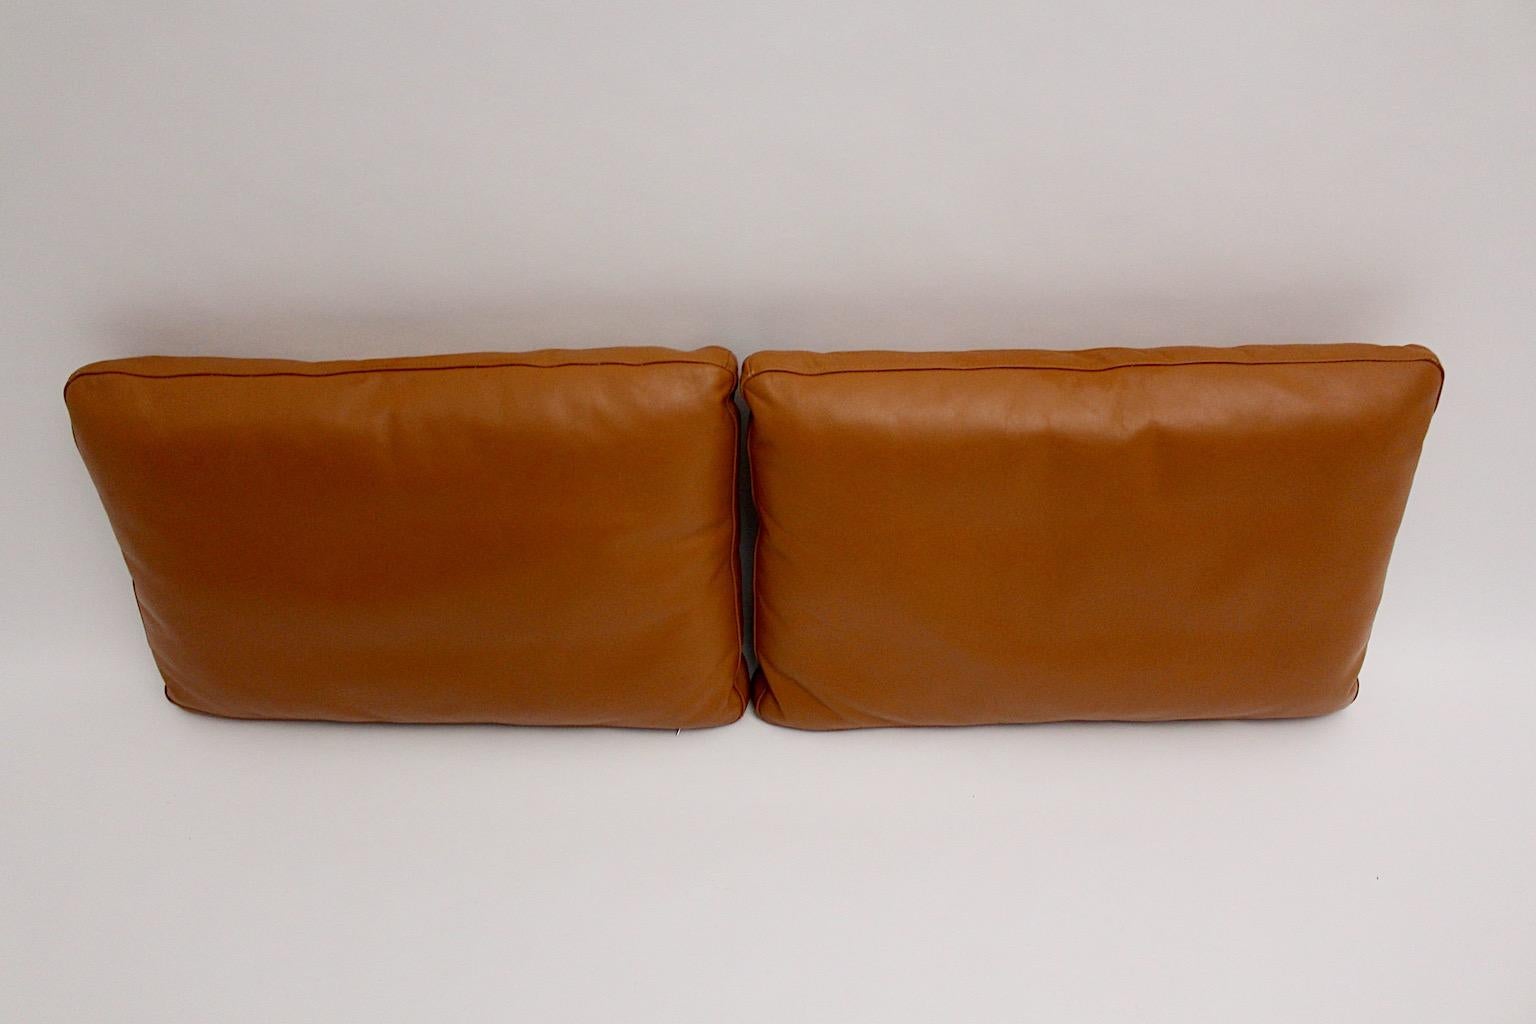 large leather pillows